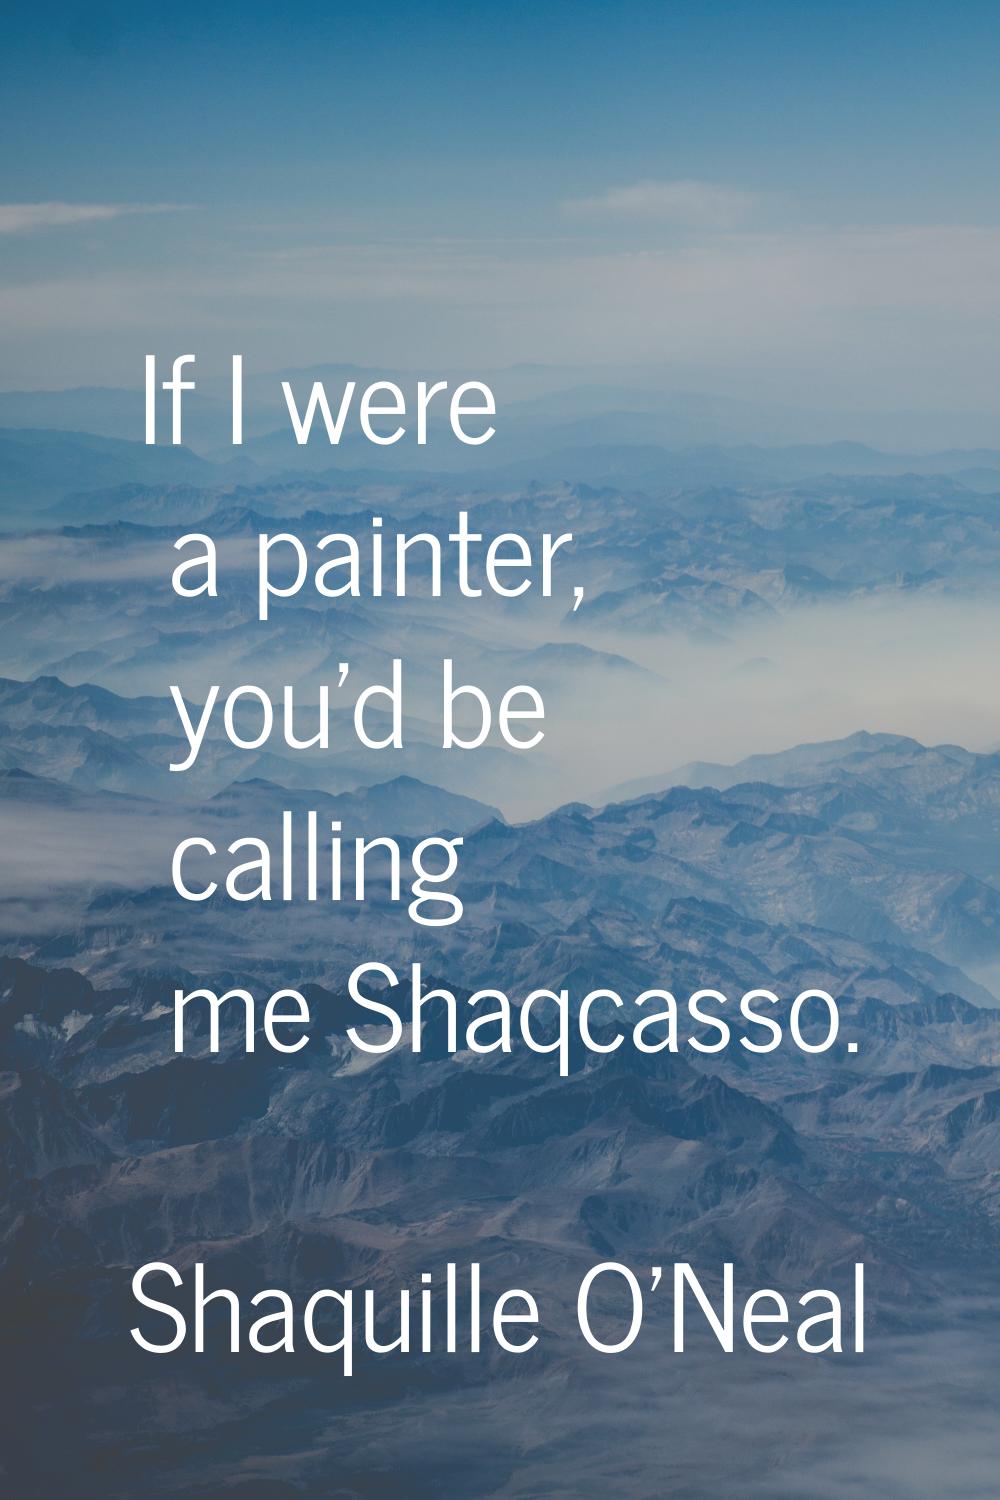 If I were a painter, you'd be calling me Shaqcasso.